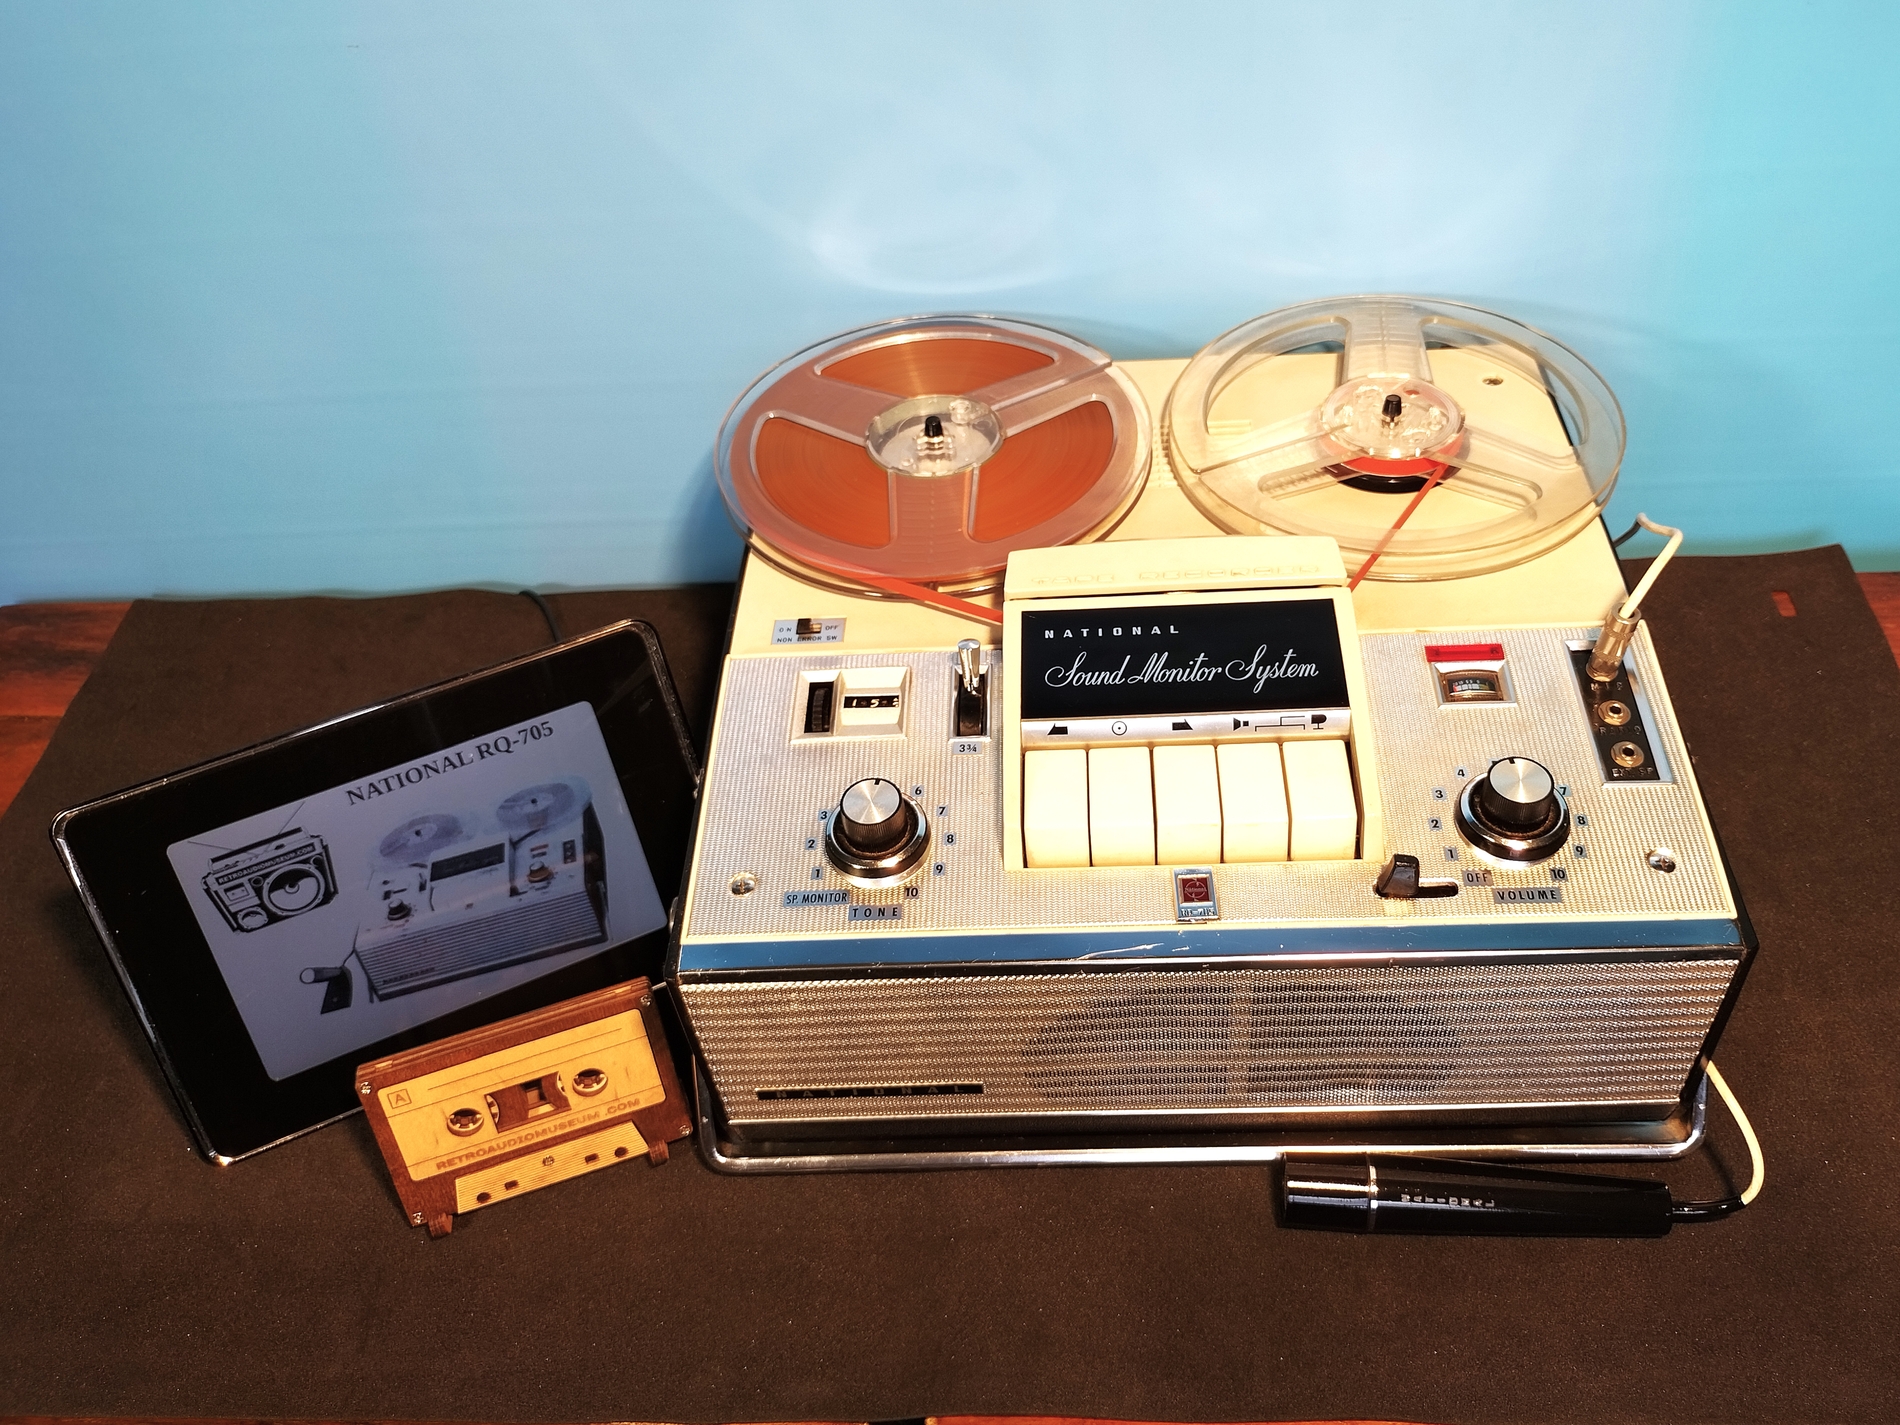 Vintage Panasonic RQ-705 Sound Monitor System Reel to Reel Tape Recorder  for sale online